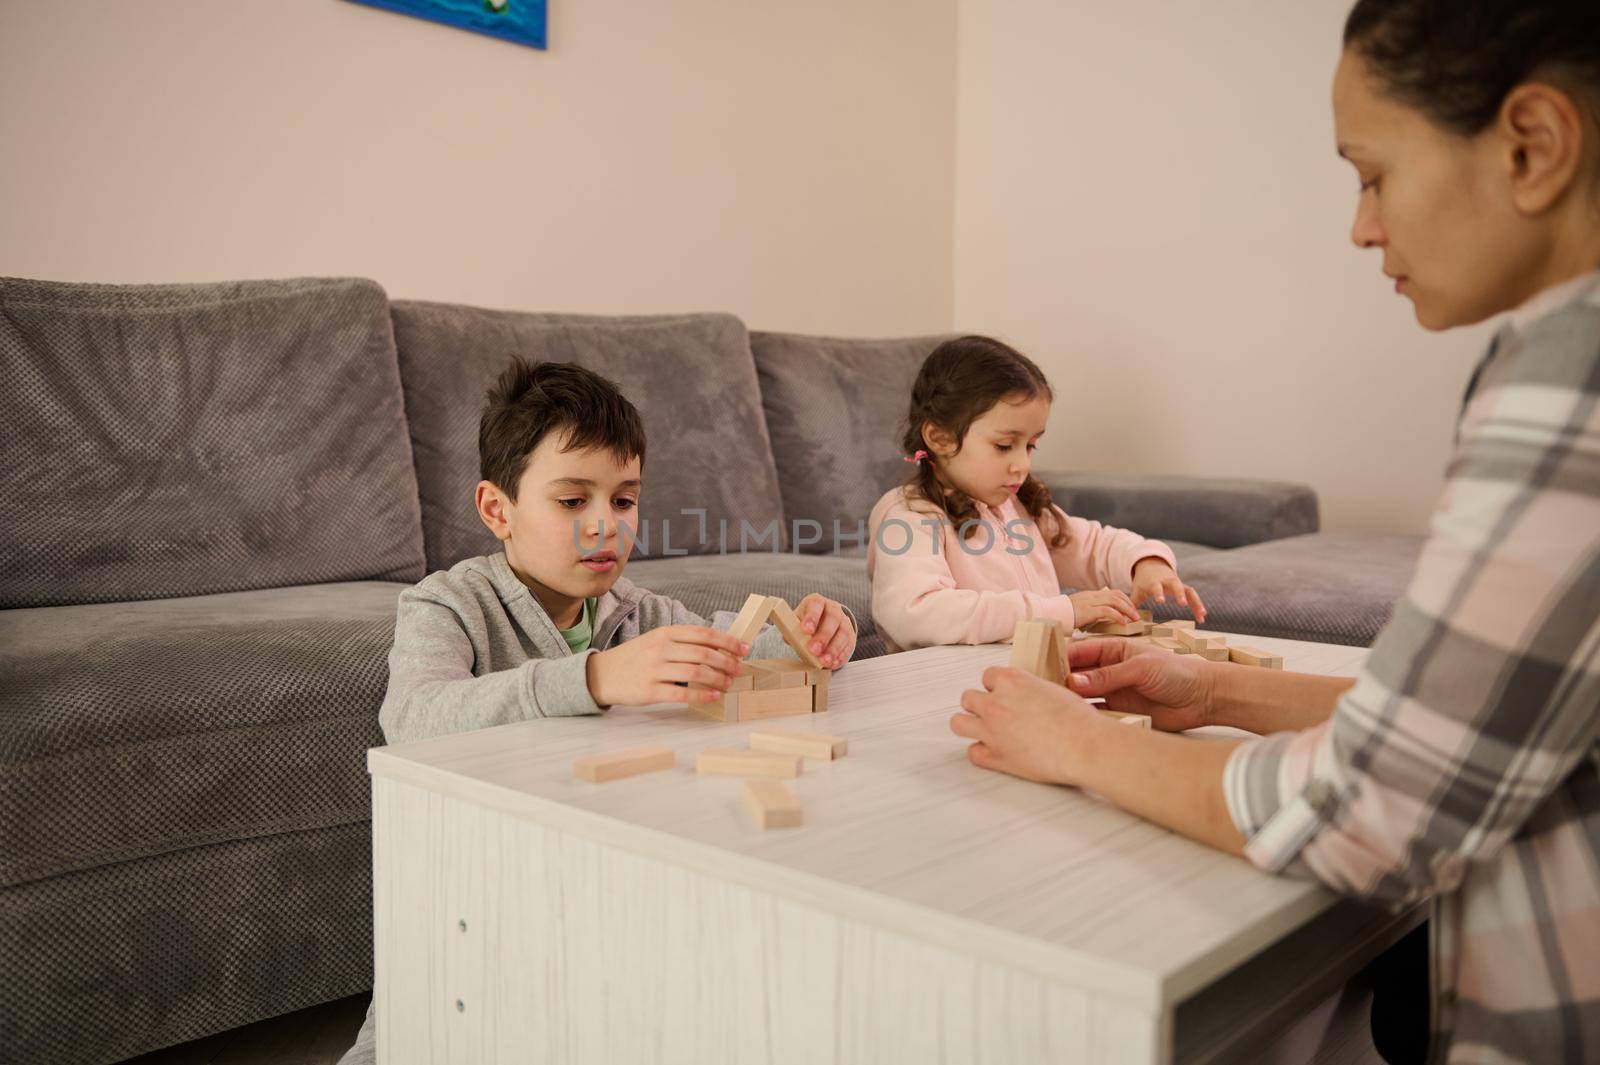 Focus on a handsome school age boy building wooden house with blocks and bricks, sitting at table near her sister and mom focused on construction of structures. Family pastime and leisure concept by artgf